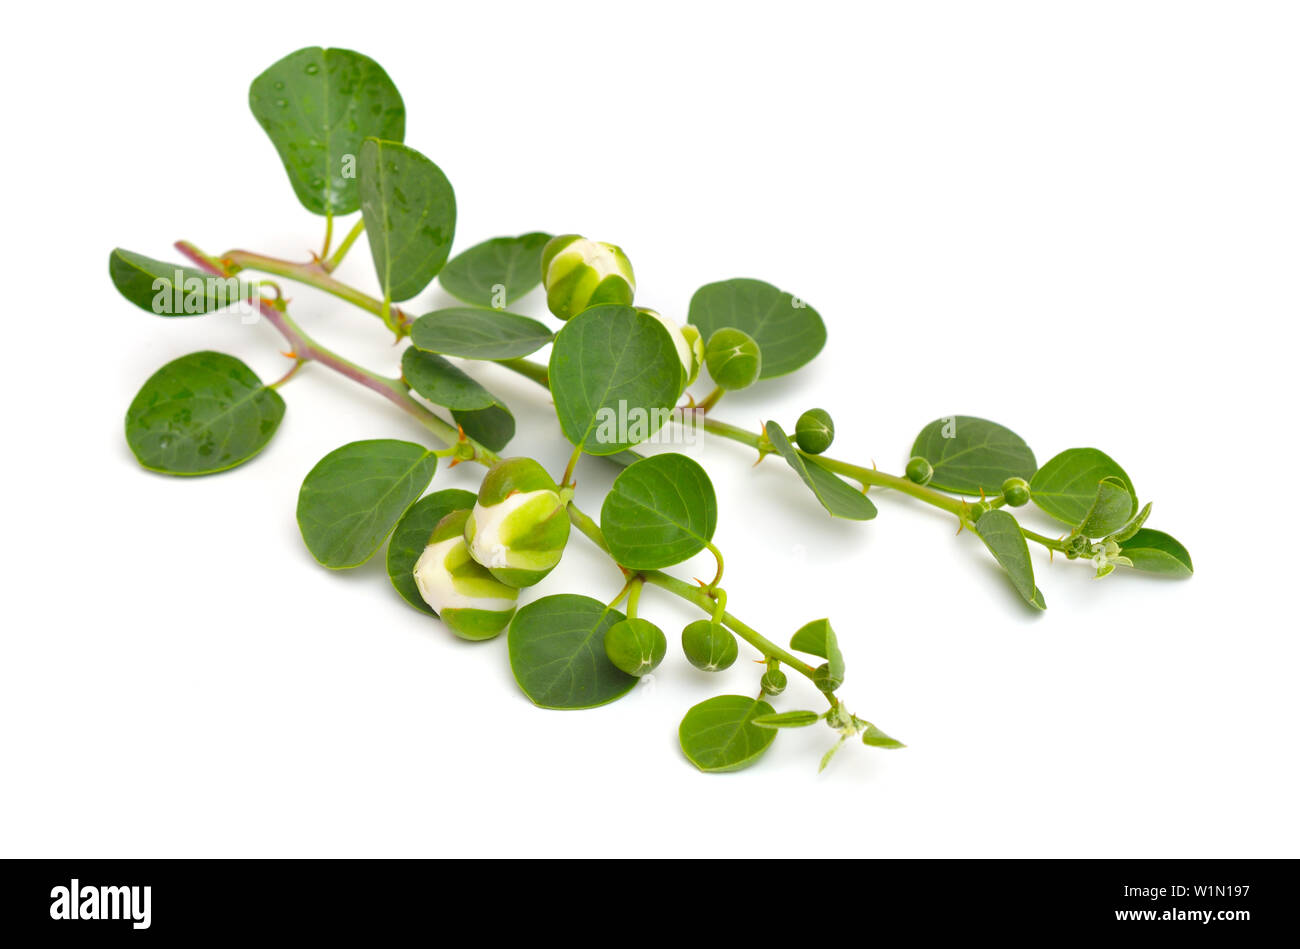 Plant Capparis, known as caper shrubs or caperbushes. Isolated on white background. Stock Photo